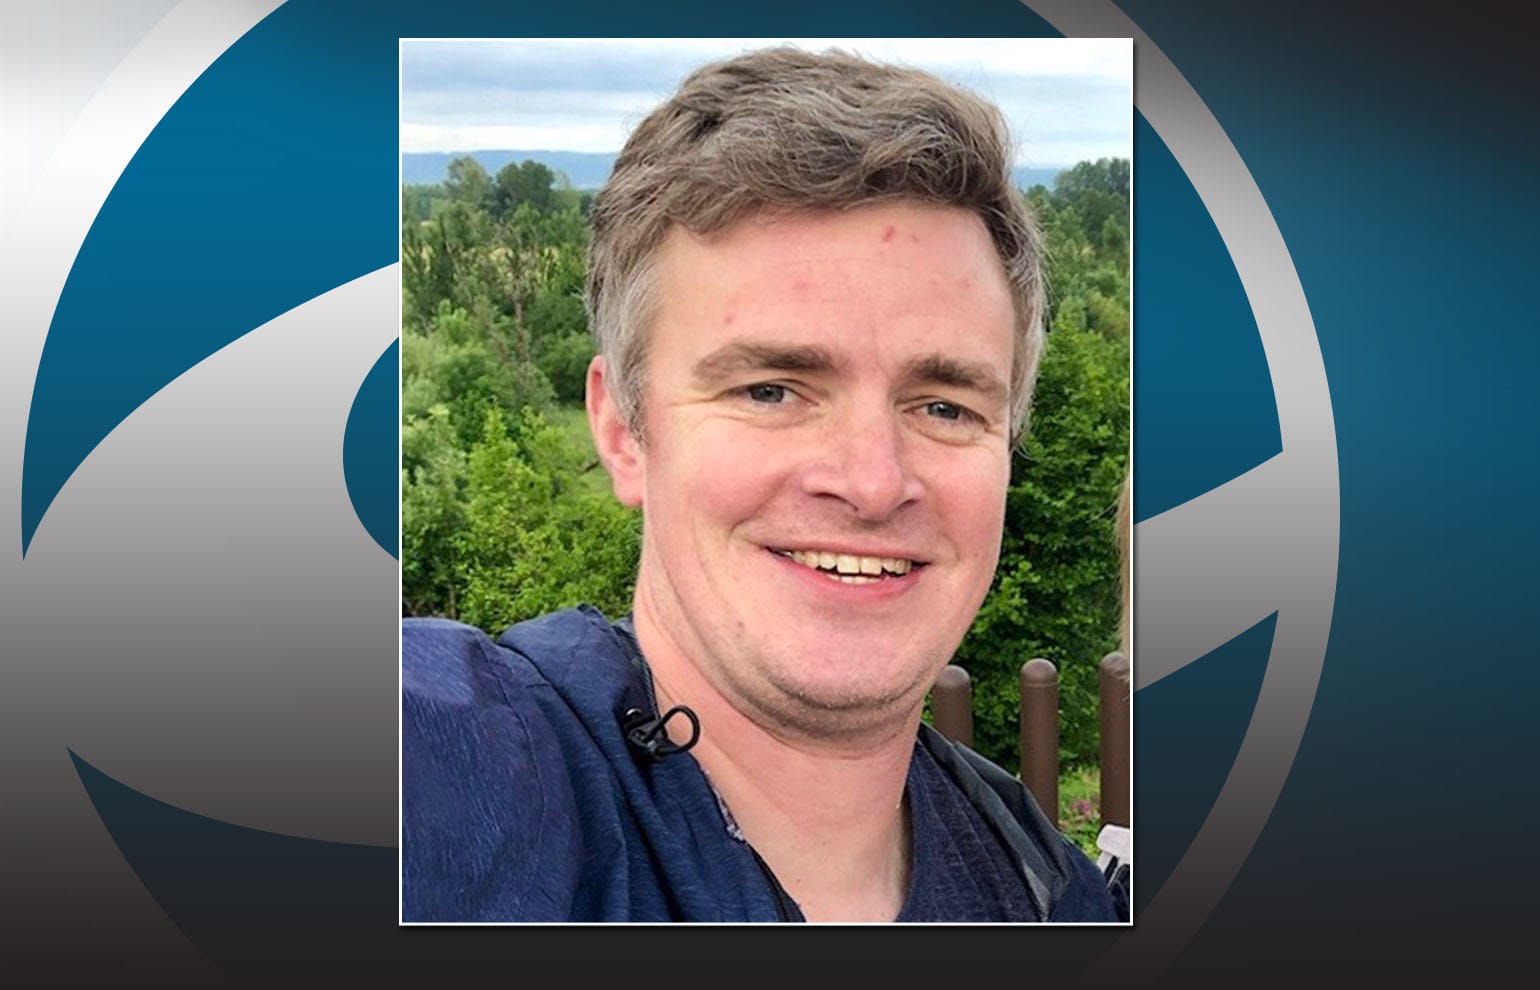 Leif Vigeland was found dead. He had been reported missing Thursday from his Vancouver home.